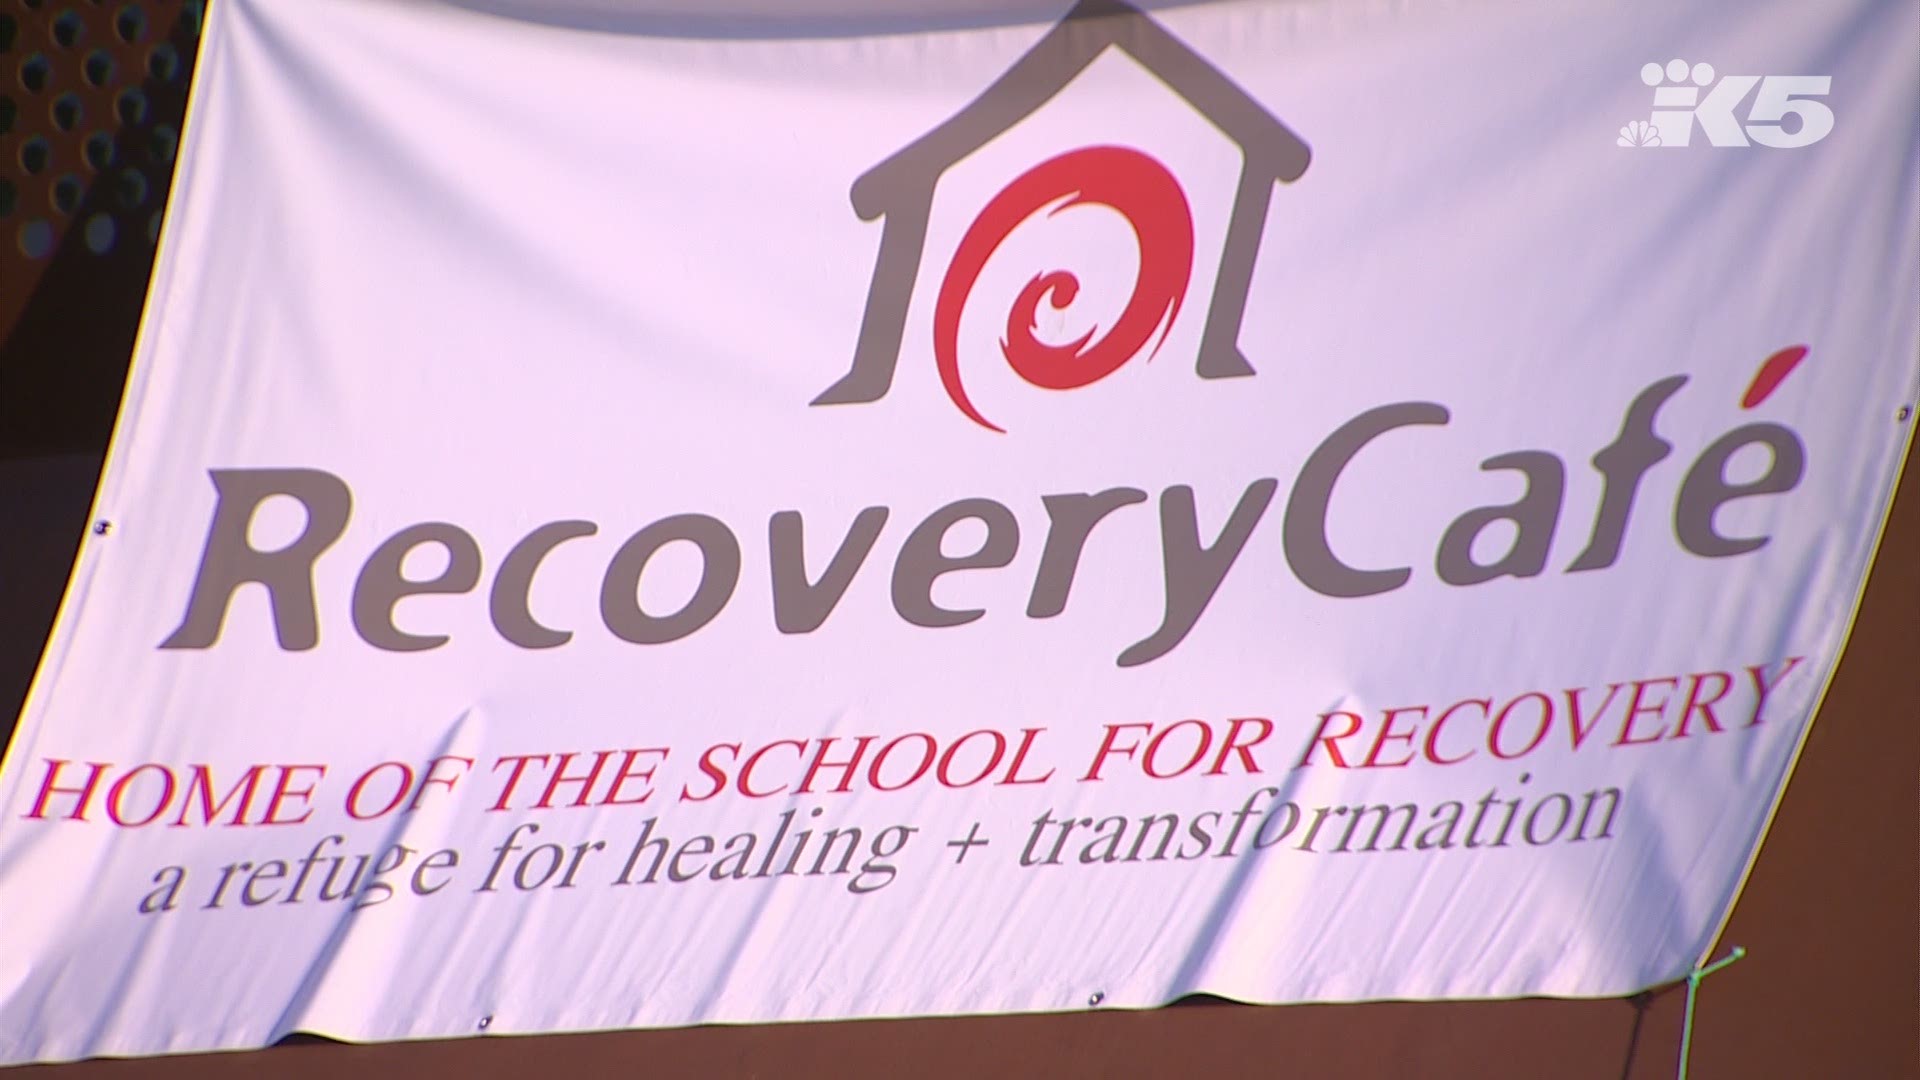 Recovery Café, which offers services to the homeless, will open a SODO location later this year. The location will serve 350 members at a time in SODO and over 1,000 people each year